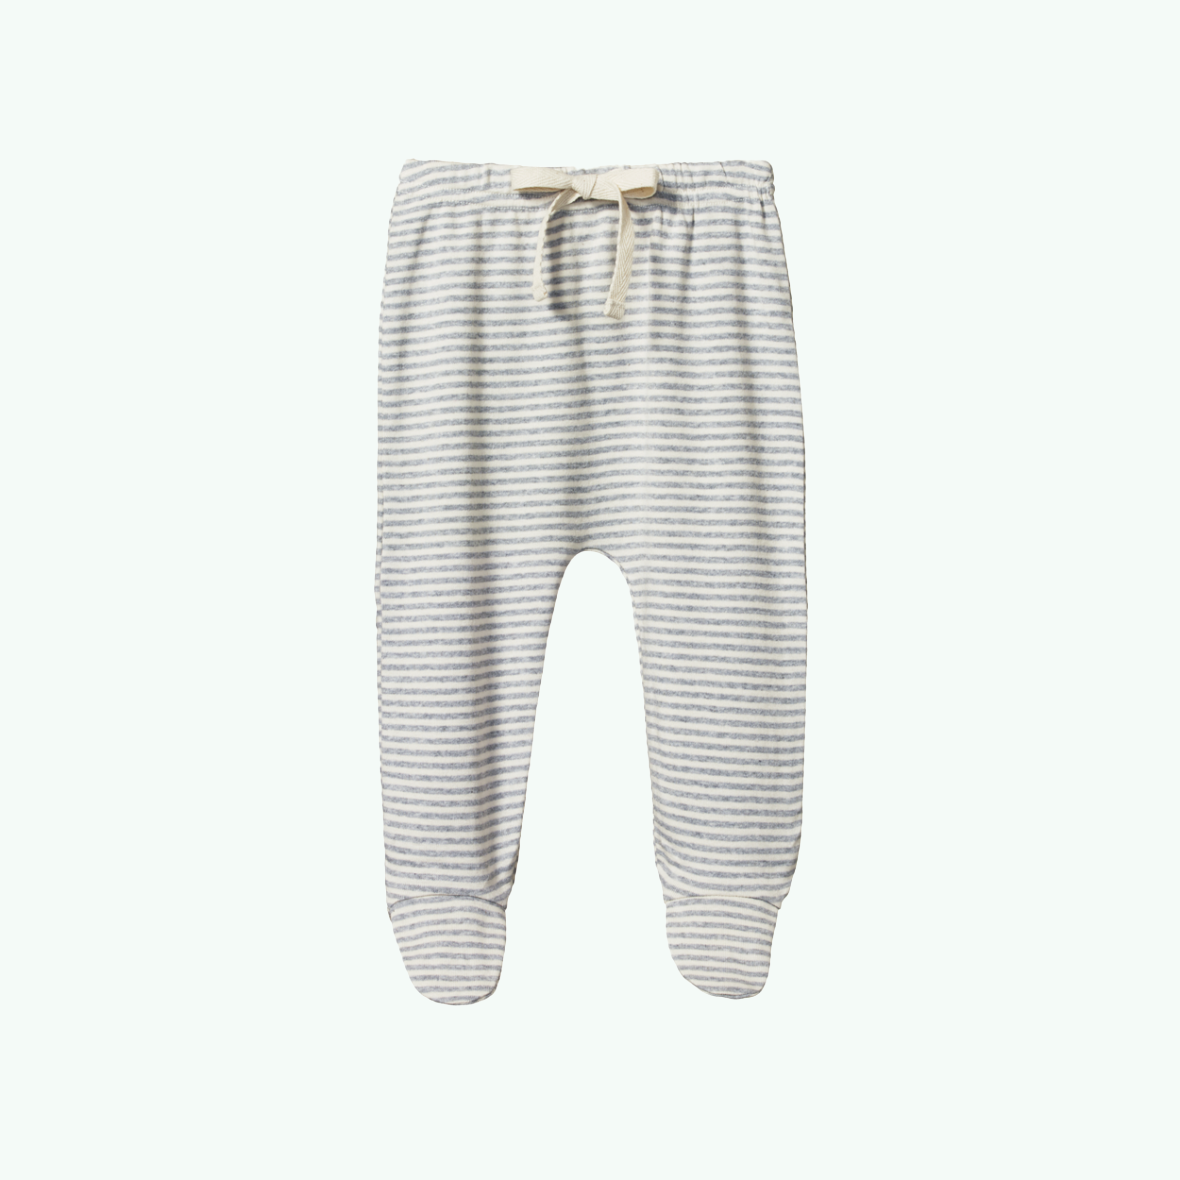 Cotton Footed Rompers - Grey Marl Stripe